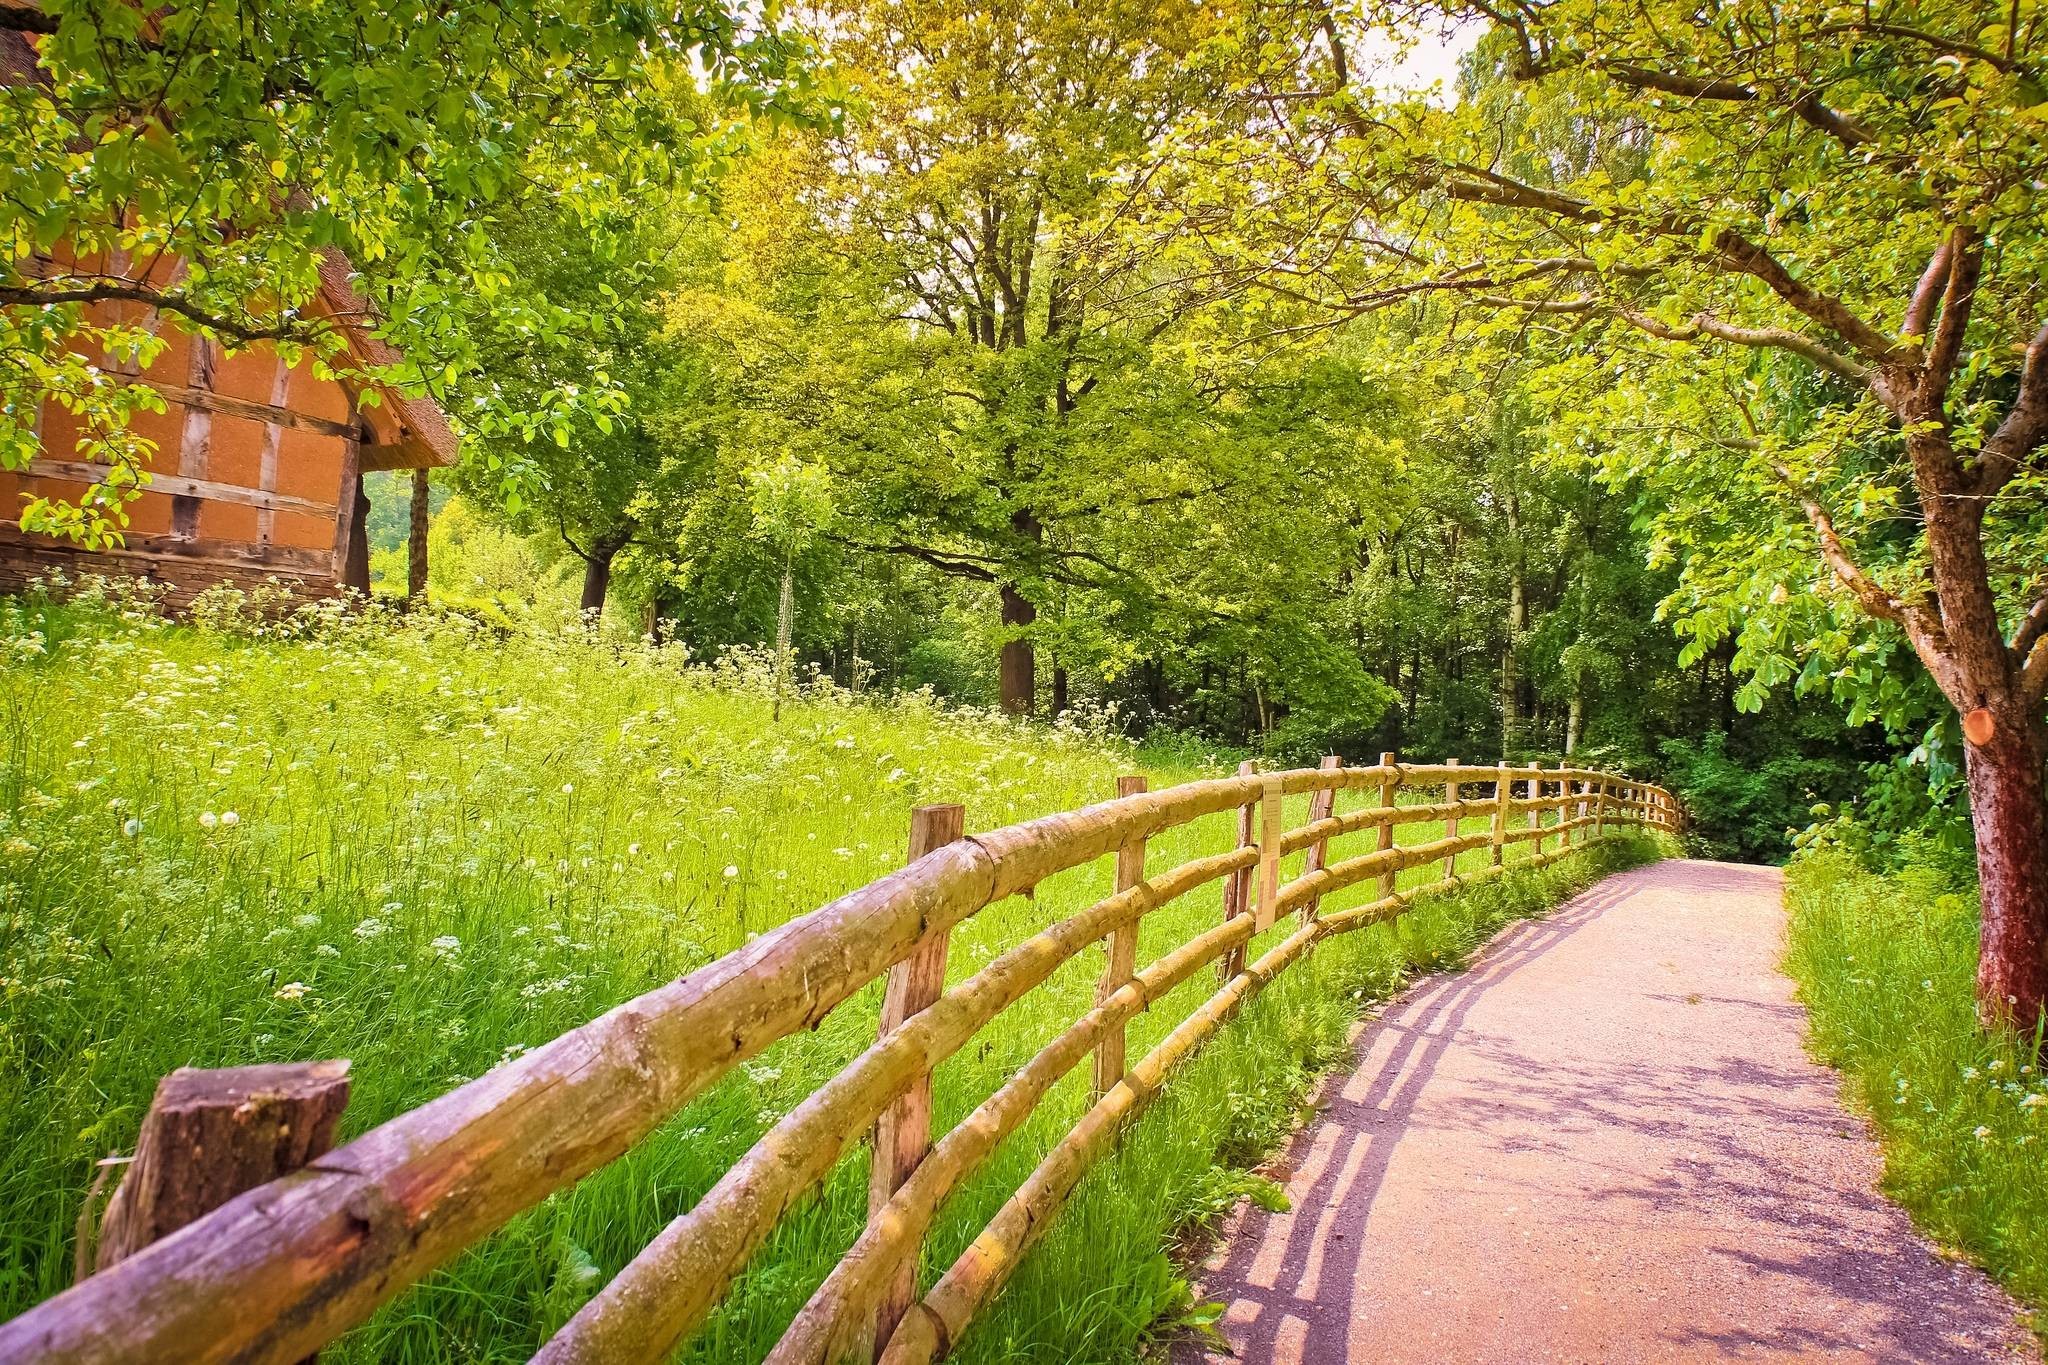 2048x1365 Road shadow fence wood trees grass green house summer nature .